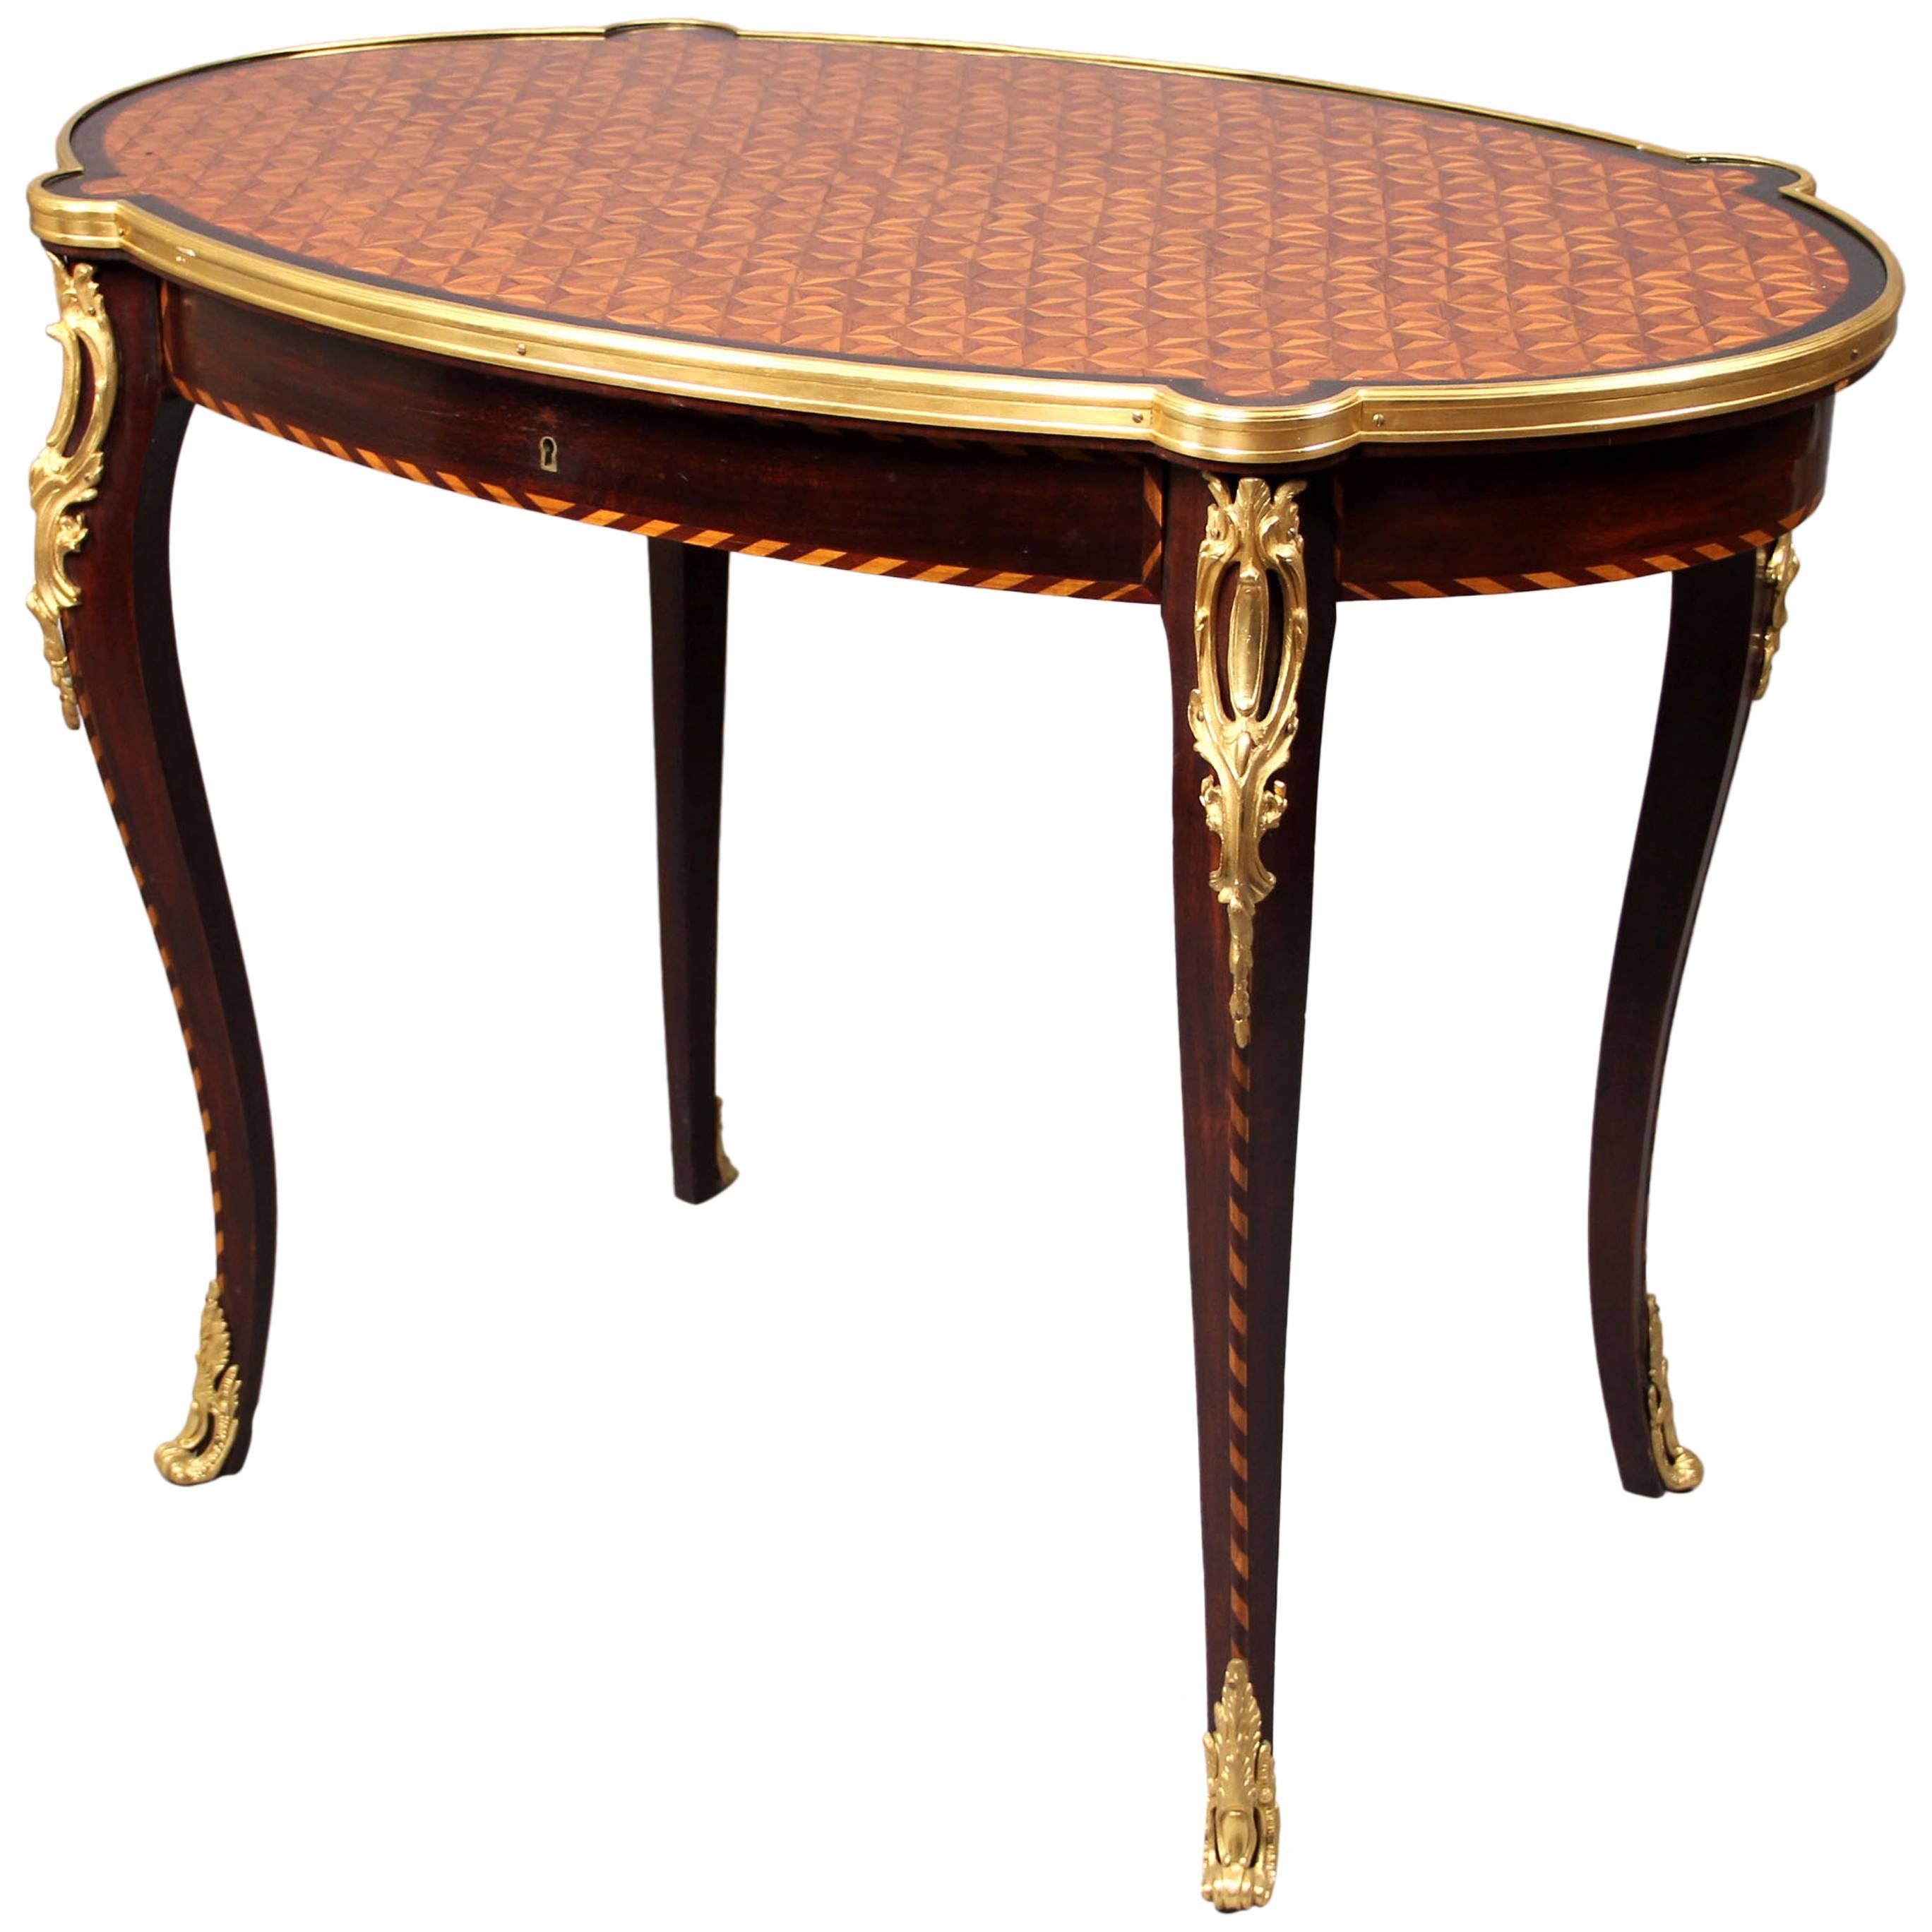 Late 19th Century Gilt Bronze Mounted Parquetry-Top Center Table